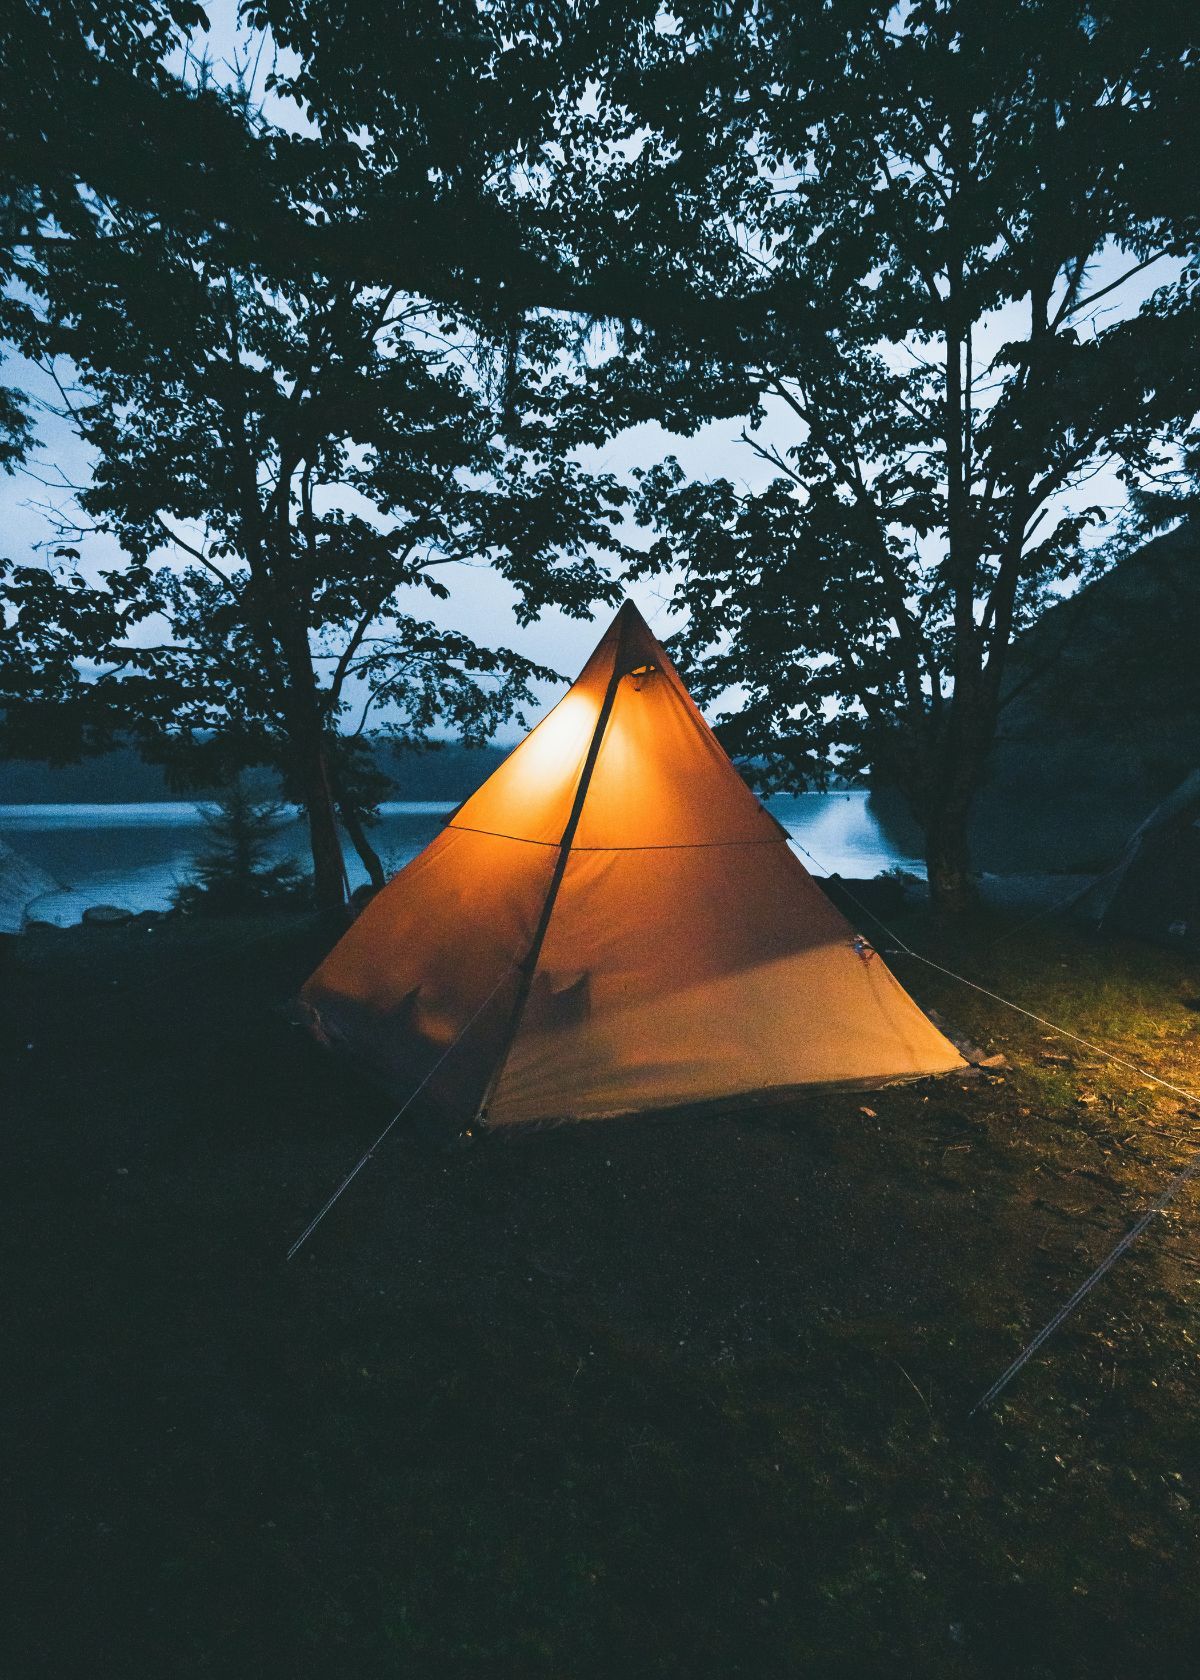 What to Look for When Buying a Camping Light